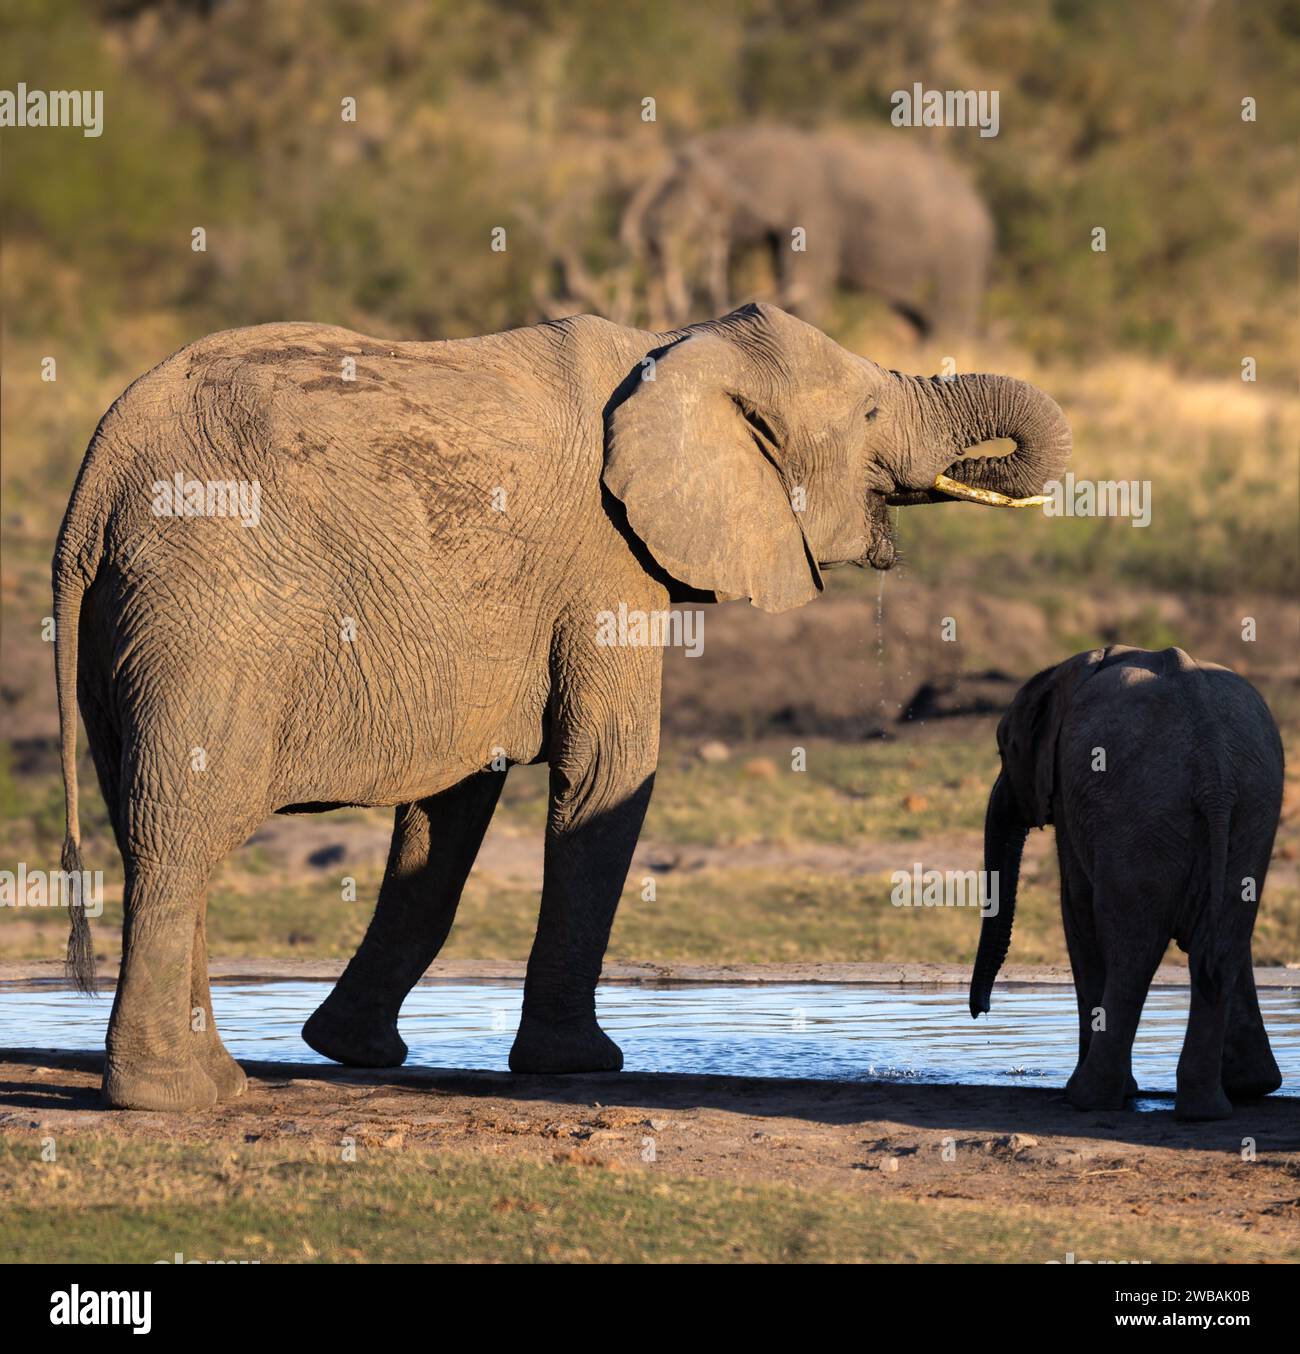 A beautiful image capturing a mother elephant and her adorable calf drinking water from a watering hole in the picturesque Kruger National Park Stock Photo